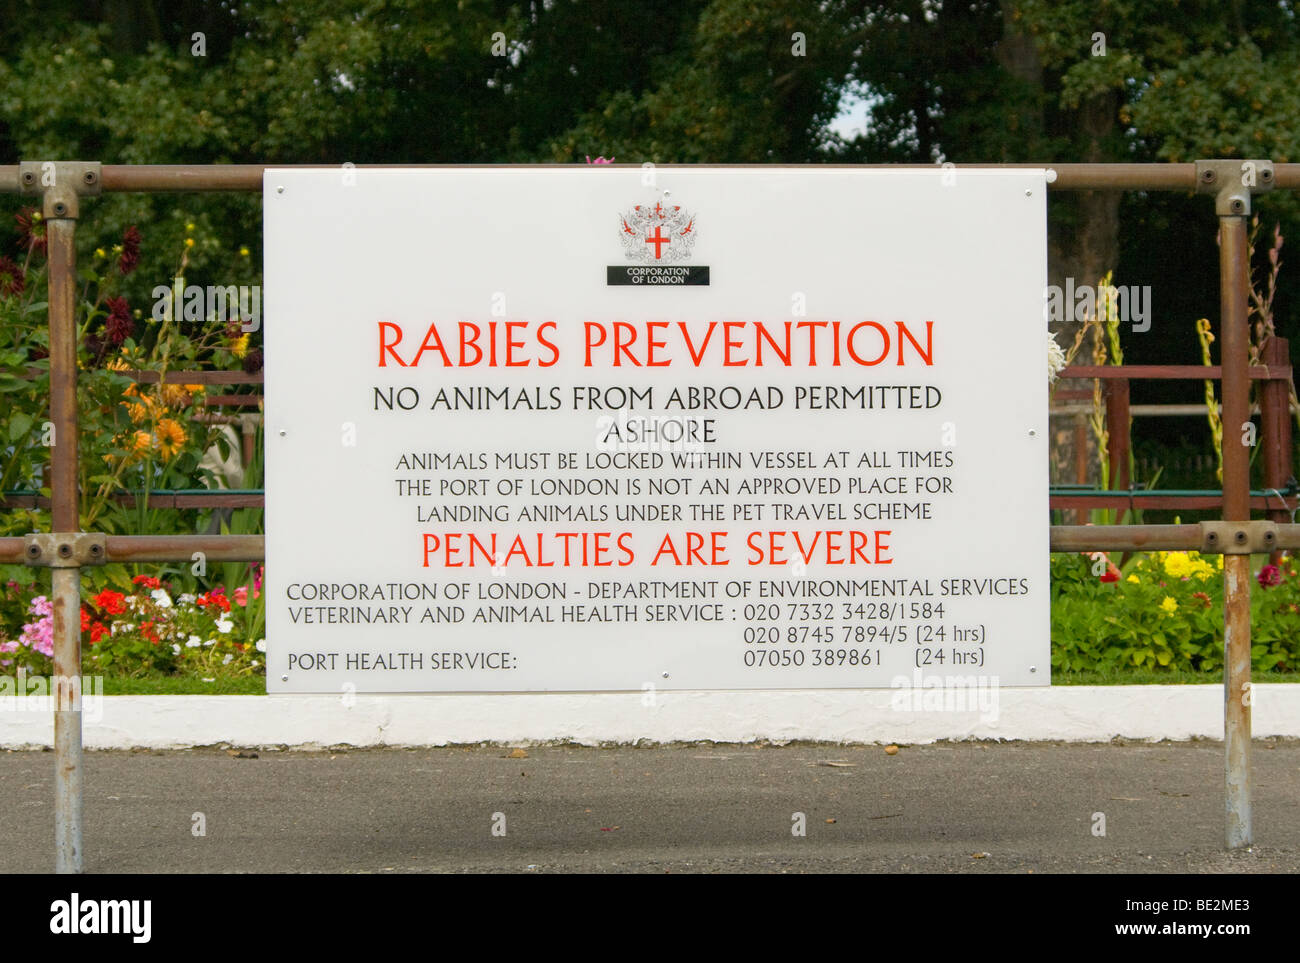 Corporation Of London Rabies Notice Mounted On Railings Stock Photo